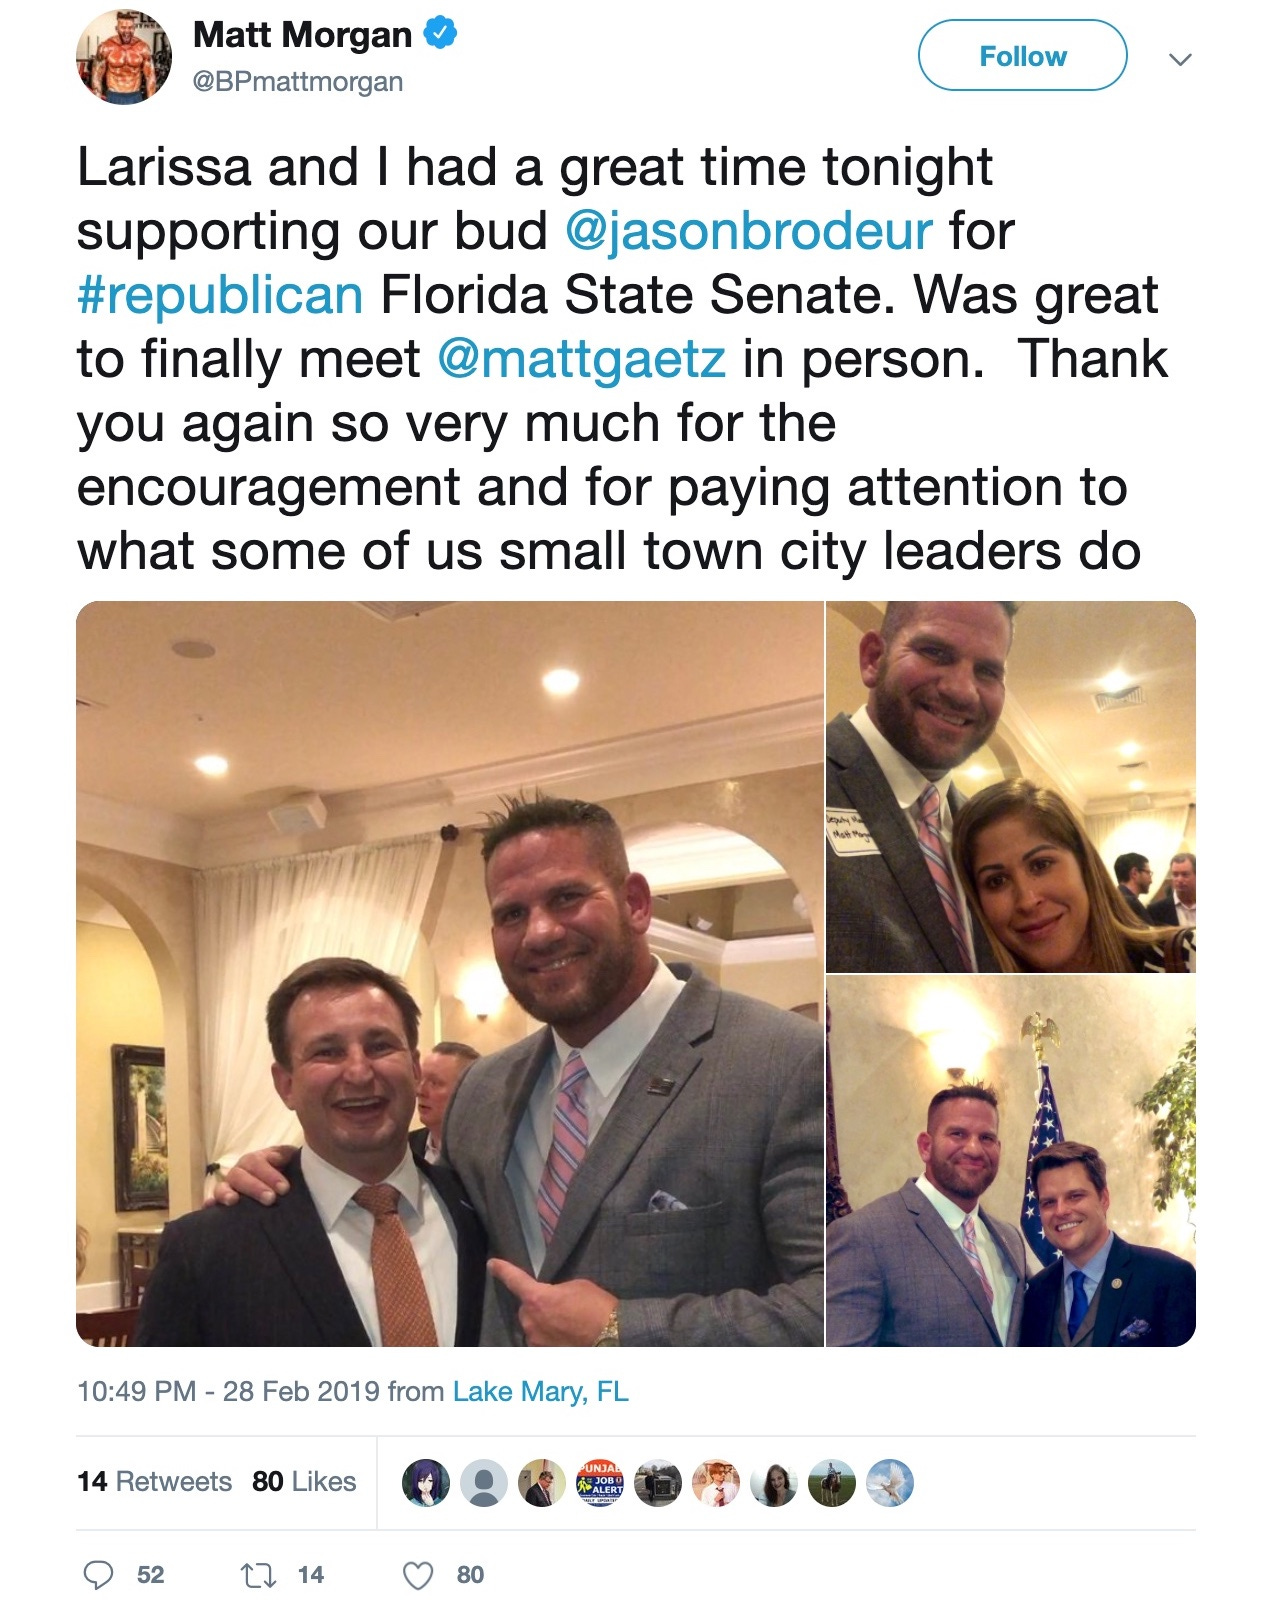 Deleted tweet from Matt Morgan’s account: “Larissa and I had a great time tonight supporting our bud @jasonbrodeur for #republican Florida State Senate. Was great to finally meet @mattgaetz in person.  Thank you again so very much for the encouragement and for paying attention to what some of us small town city leaders do[.]” (Screenshot: @BPmattmorgan on Twitter via Google Cache)